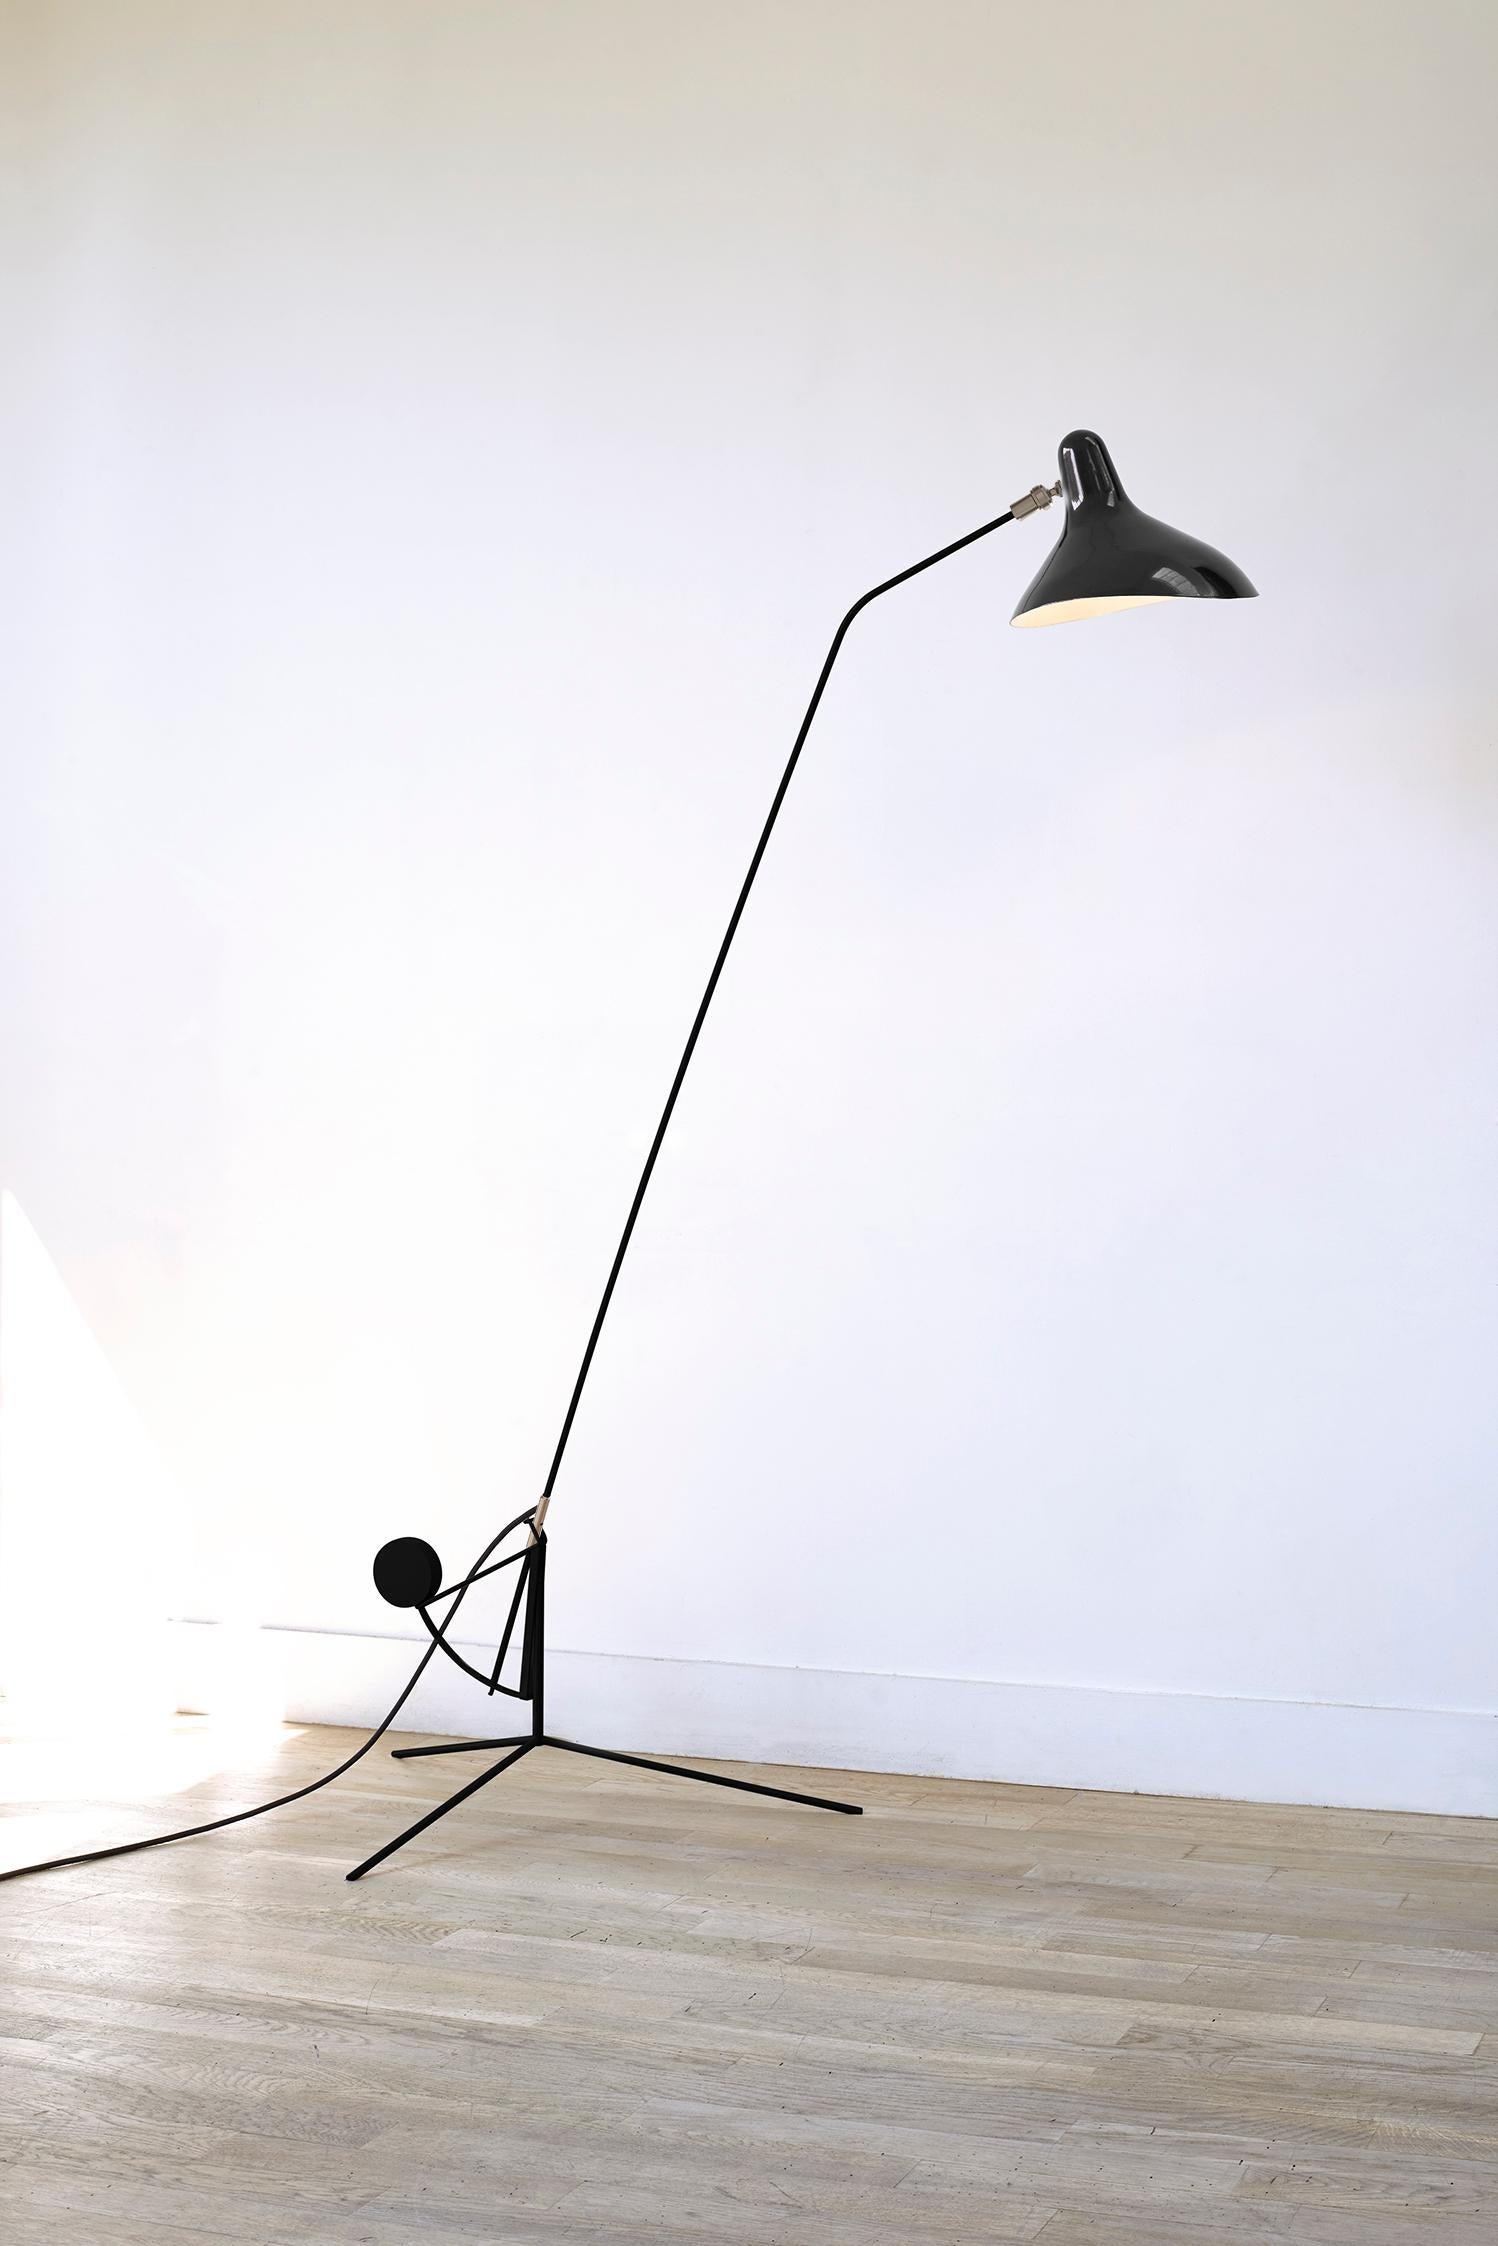 Mantis BS1 large floor lamp by Bernard Schottlander
Dimensions: D 108 x W 74 x H 170 cm
Materials: Steel, Aluminum

All our lamps can be wired according to each country. If sold to the USA it will be wired for the USA for instance.

Floor lamp